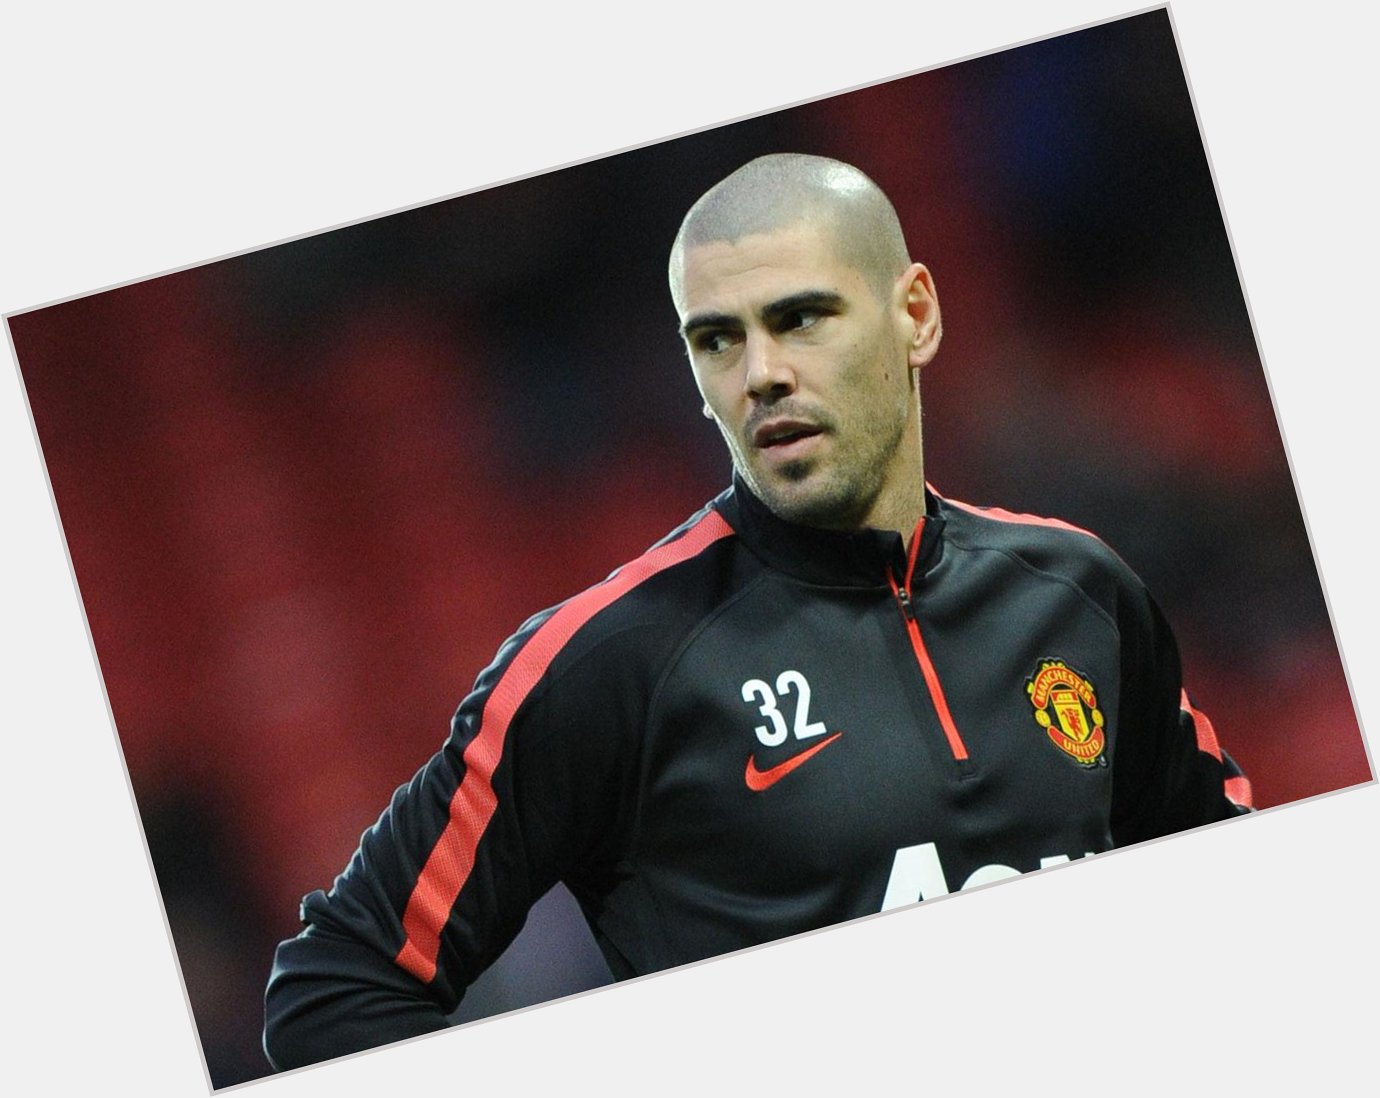 Happy birthday to Manchester United new boy and former Barcelona goalkeeper Victor Valdes, who turns 33 today. 